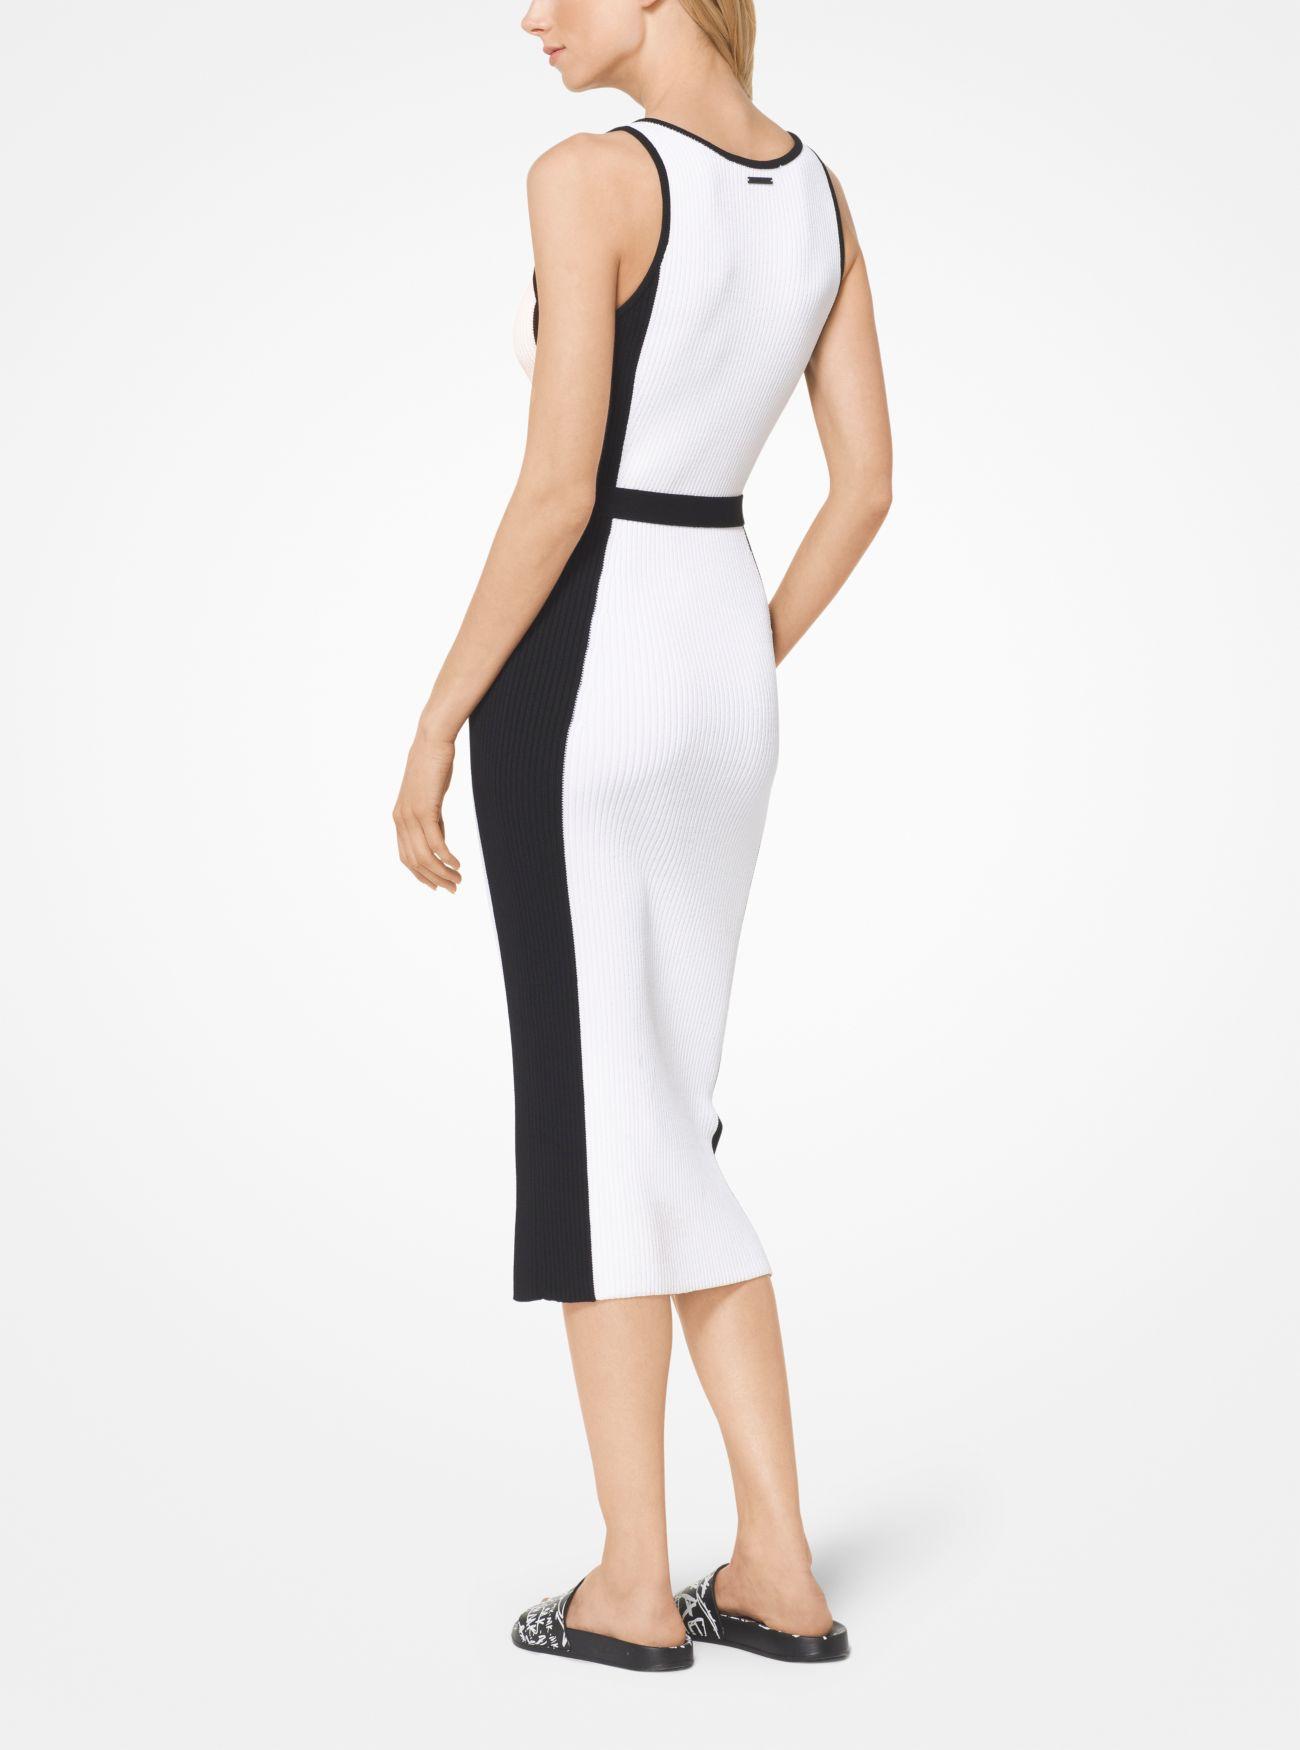 MICHAEL Kors Synthetic Contrast Ribbed Knit Dress in White Lyst